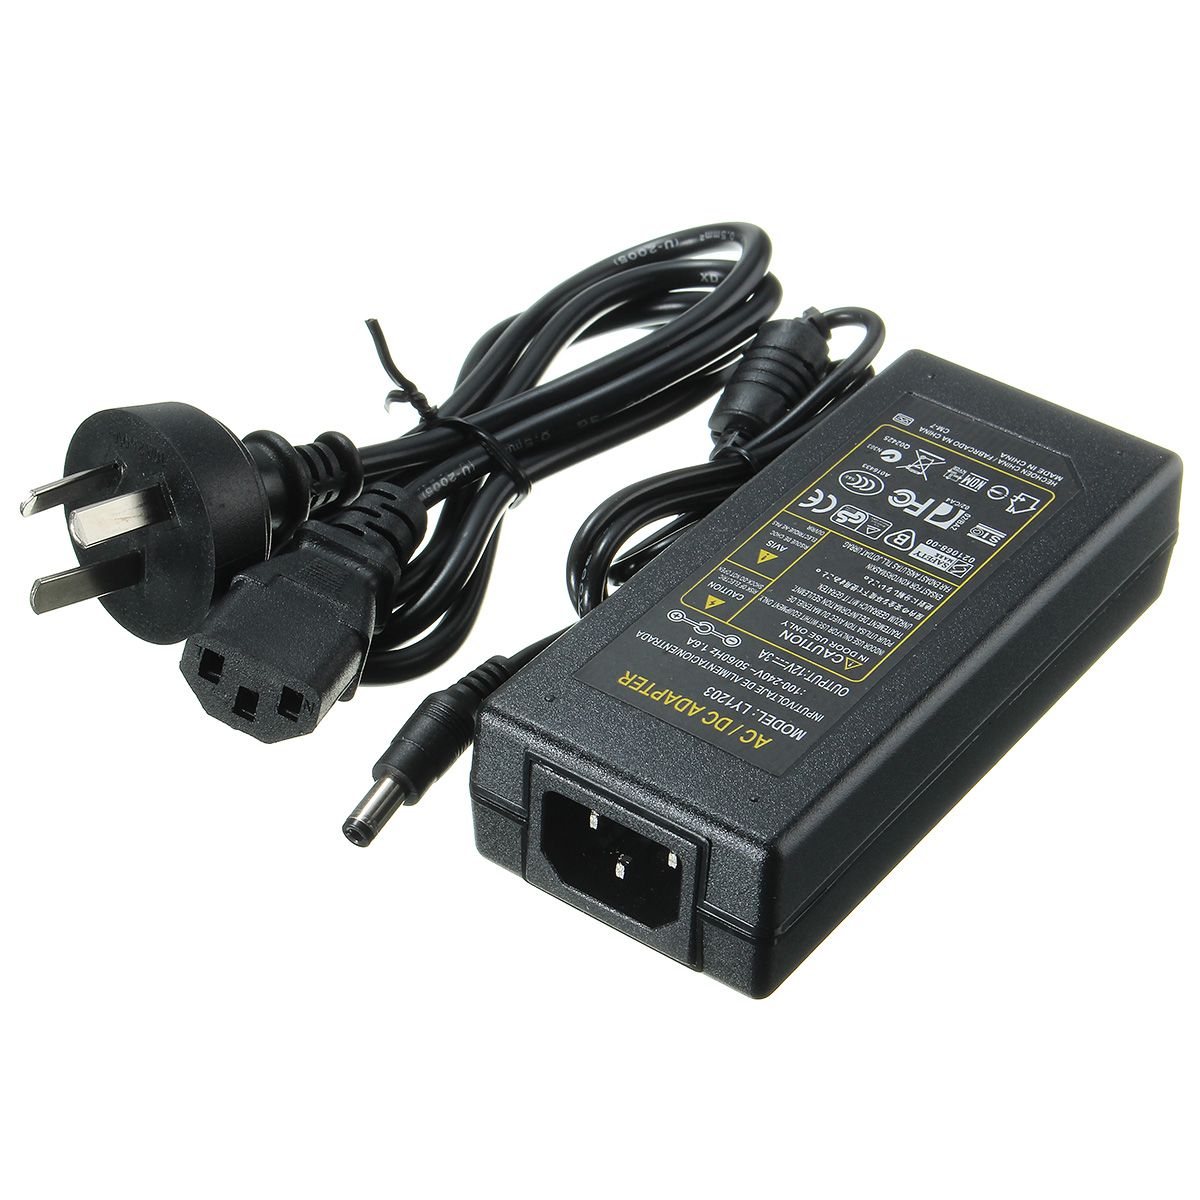 AC-100-240V-to-DC-12V-3A-36W-Power-Supply-Adapter-for-LED-Strip-86979